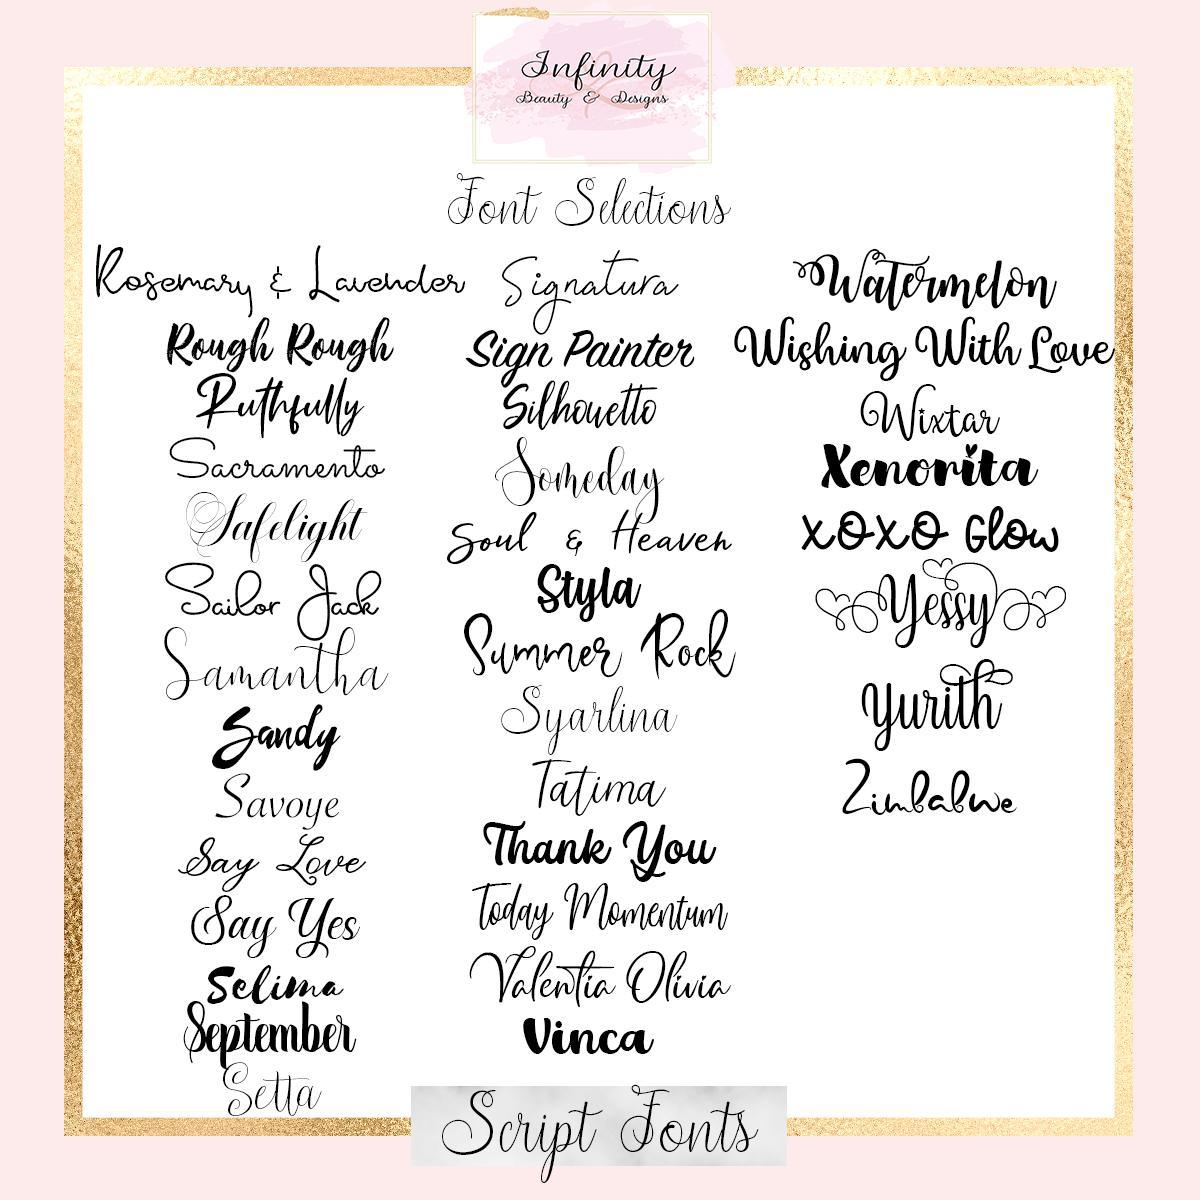 Sashes-Infinity Beauty & Designs